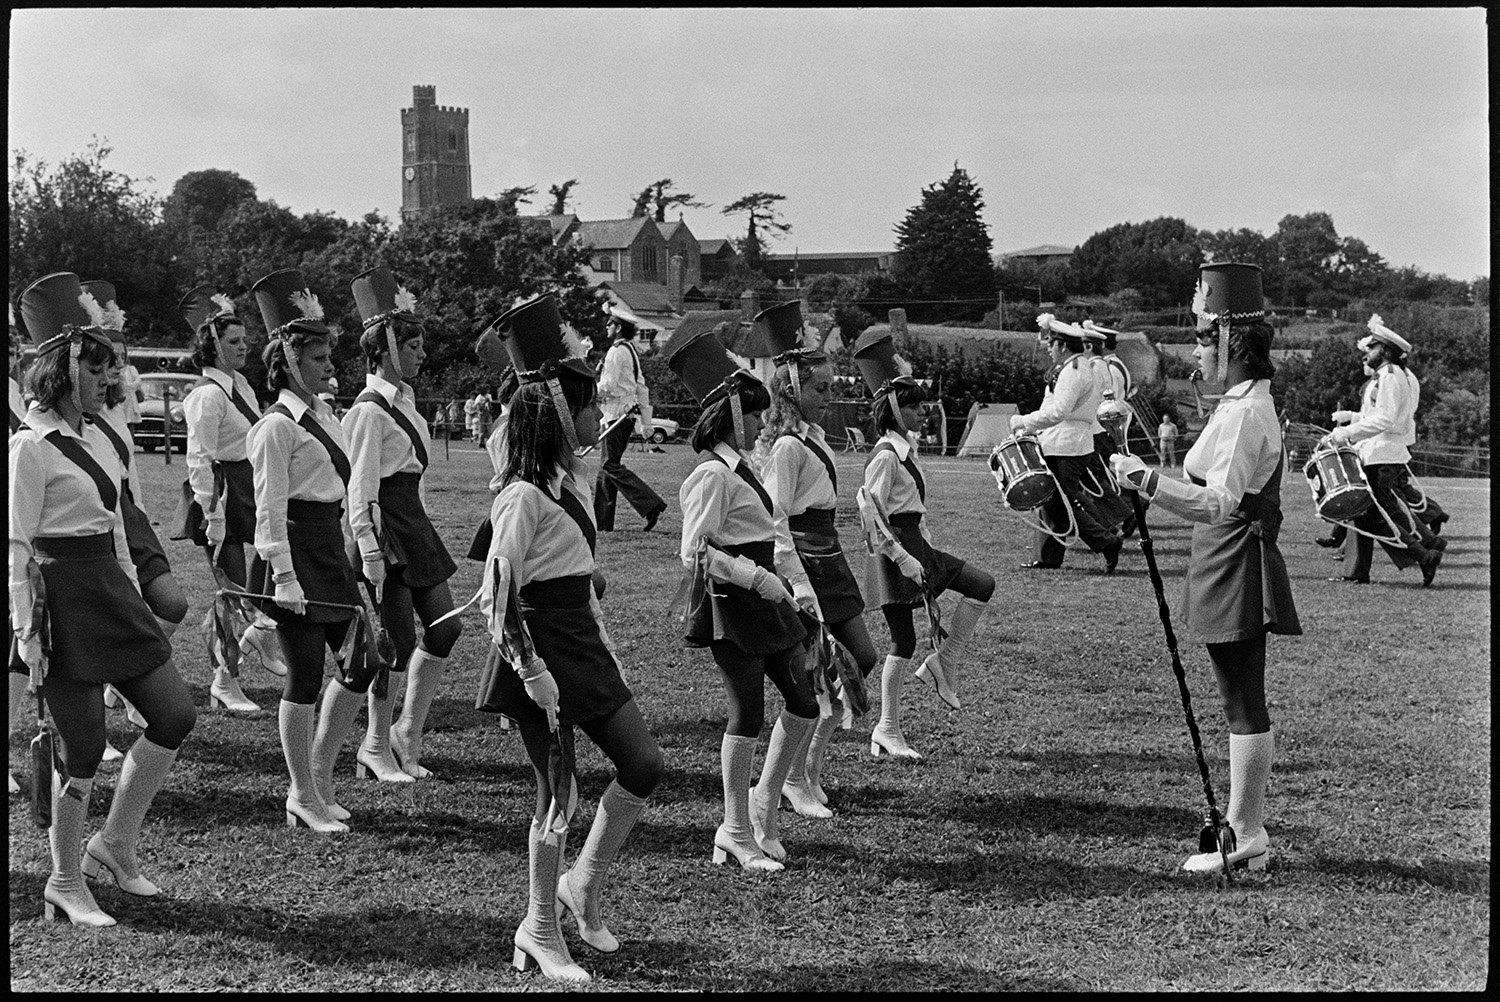 Band and drum majorettes on parade. 
[Majorettes performing at Atherington Village fete. A drum band are marching past in the background.]